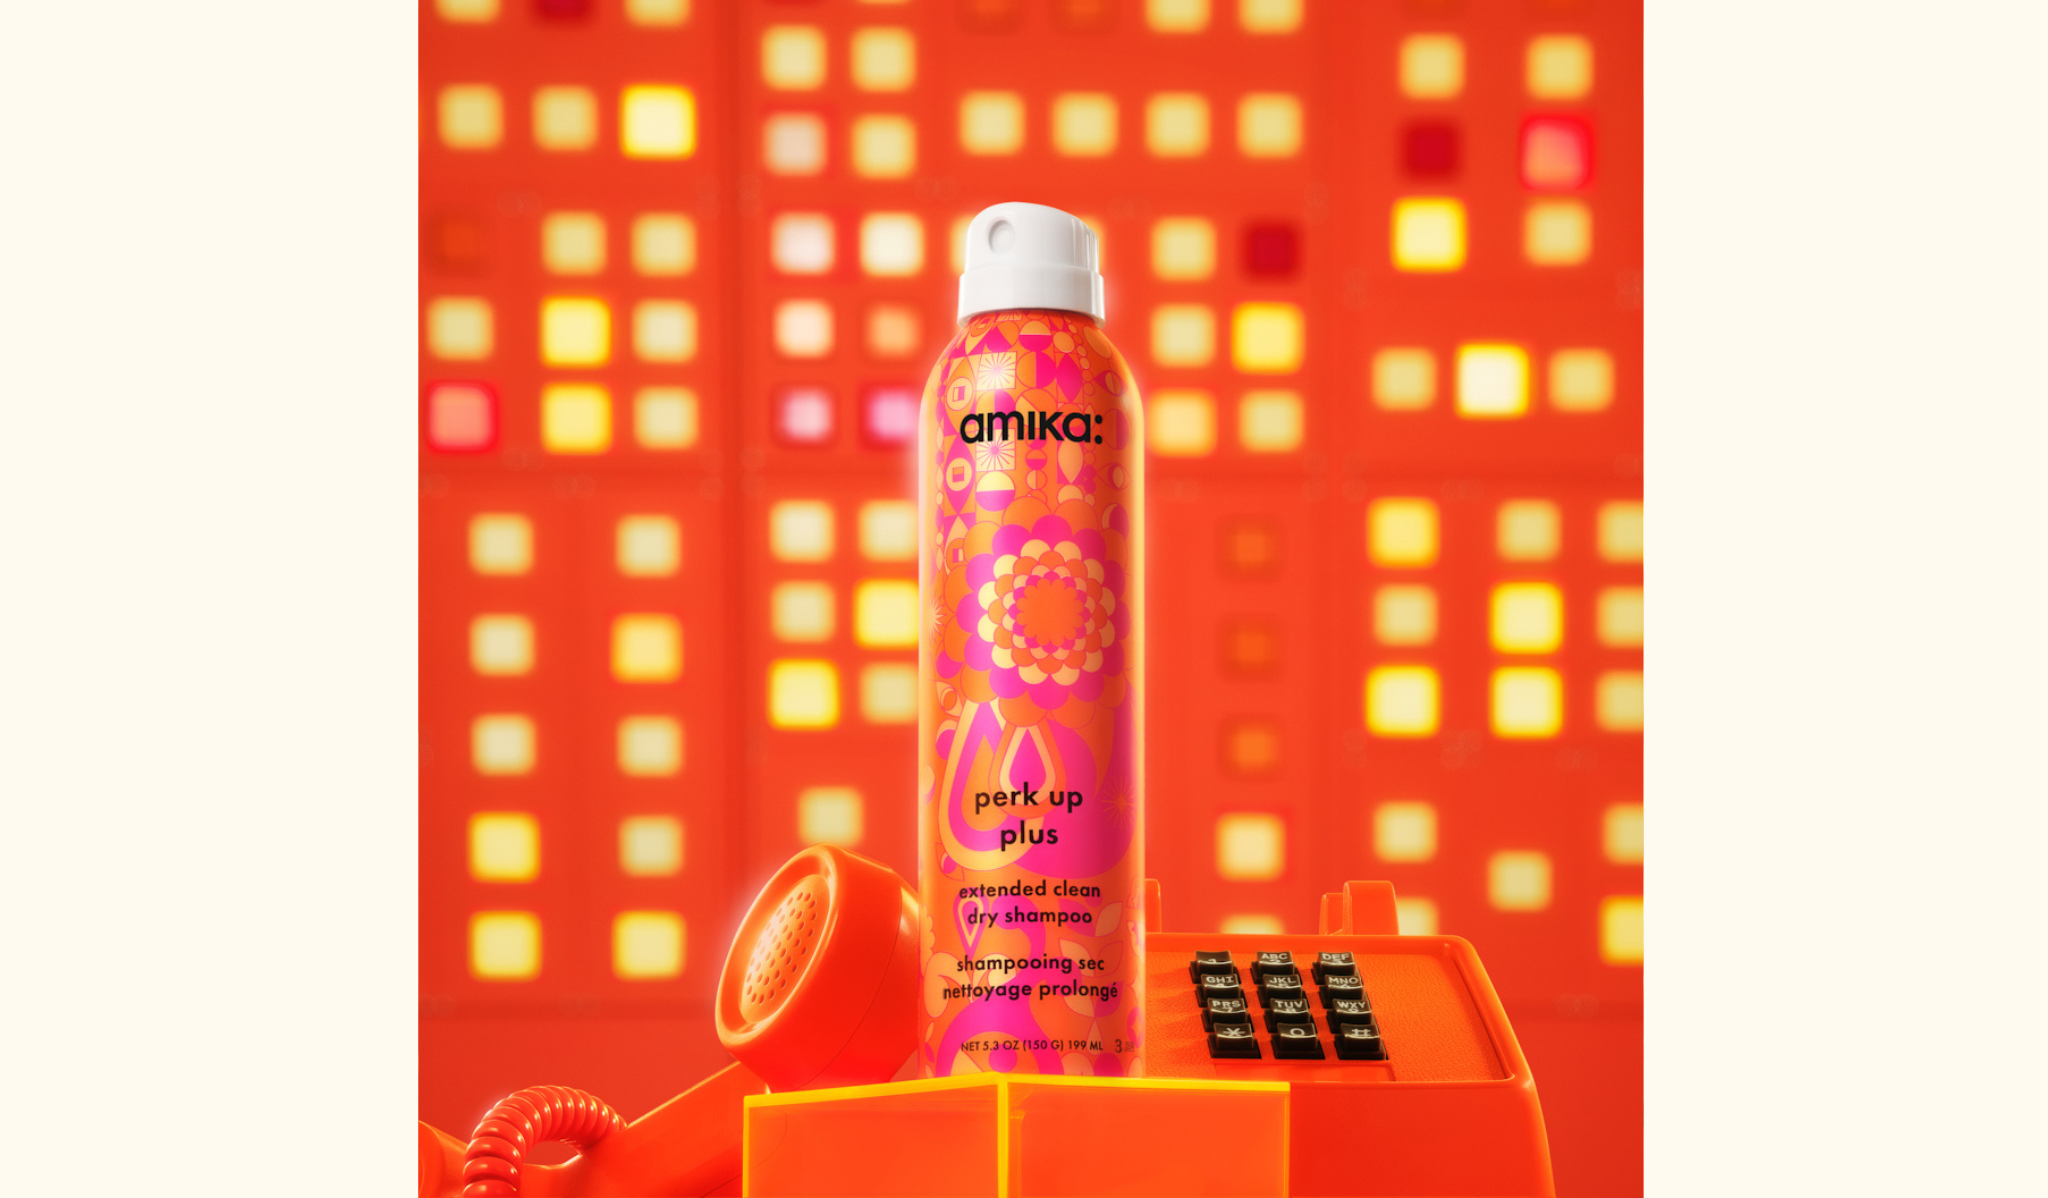 amika perk up plus extended clean dry shampoo spray bottle 5.3oz - pictured with an orange telephone against a geometric background